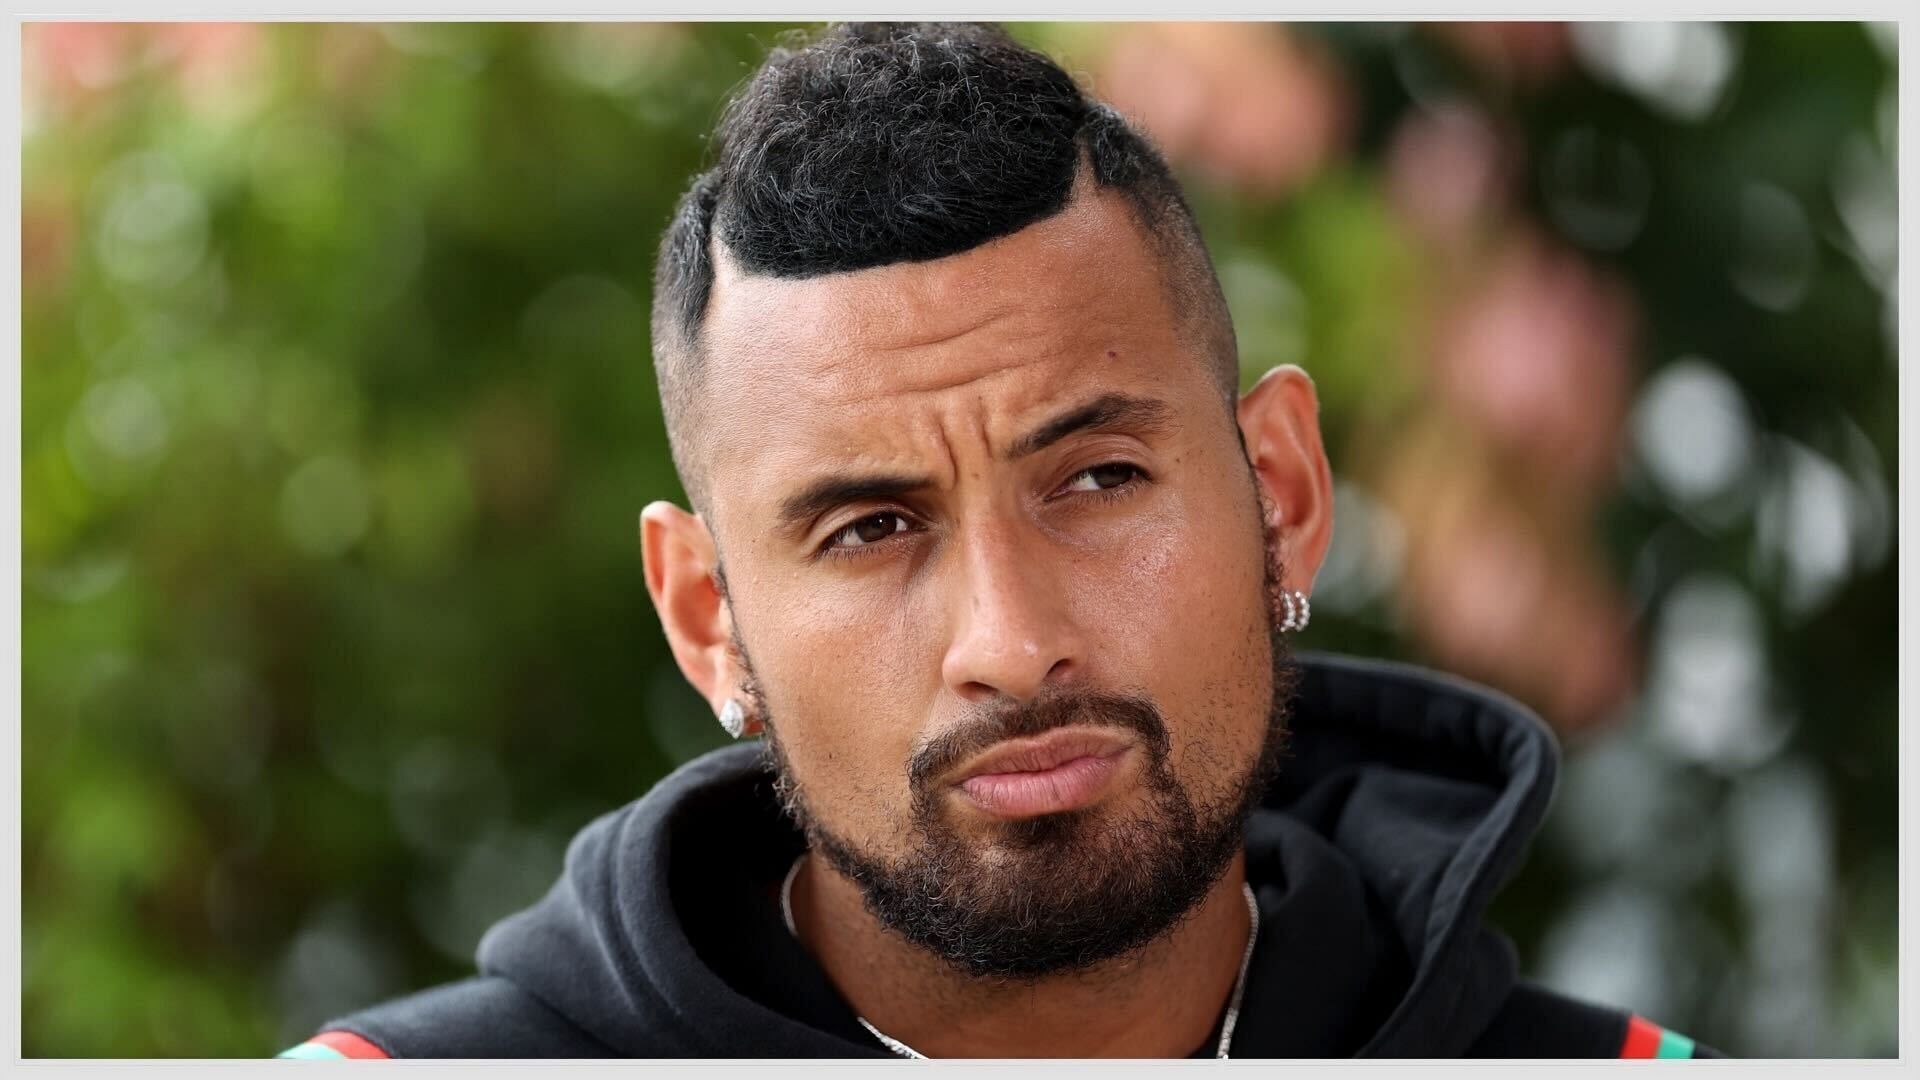 Nick Kyrgios talks about being colored person playing &quot;predominantly white&quot; sport